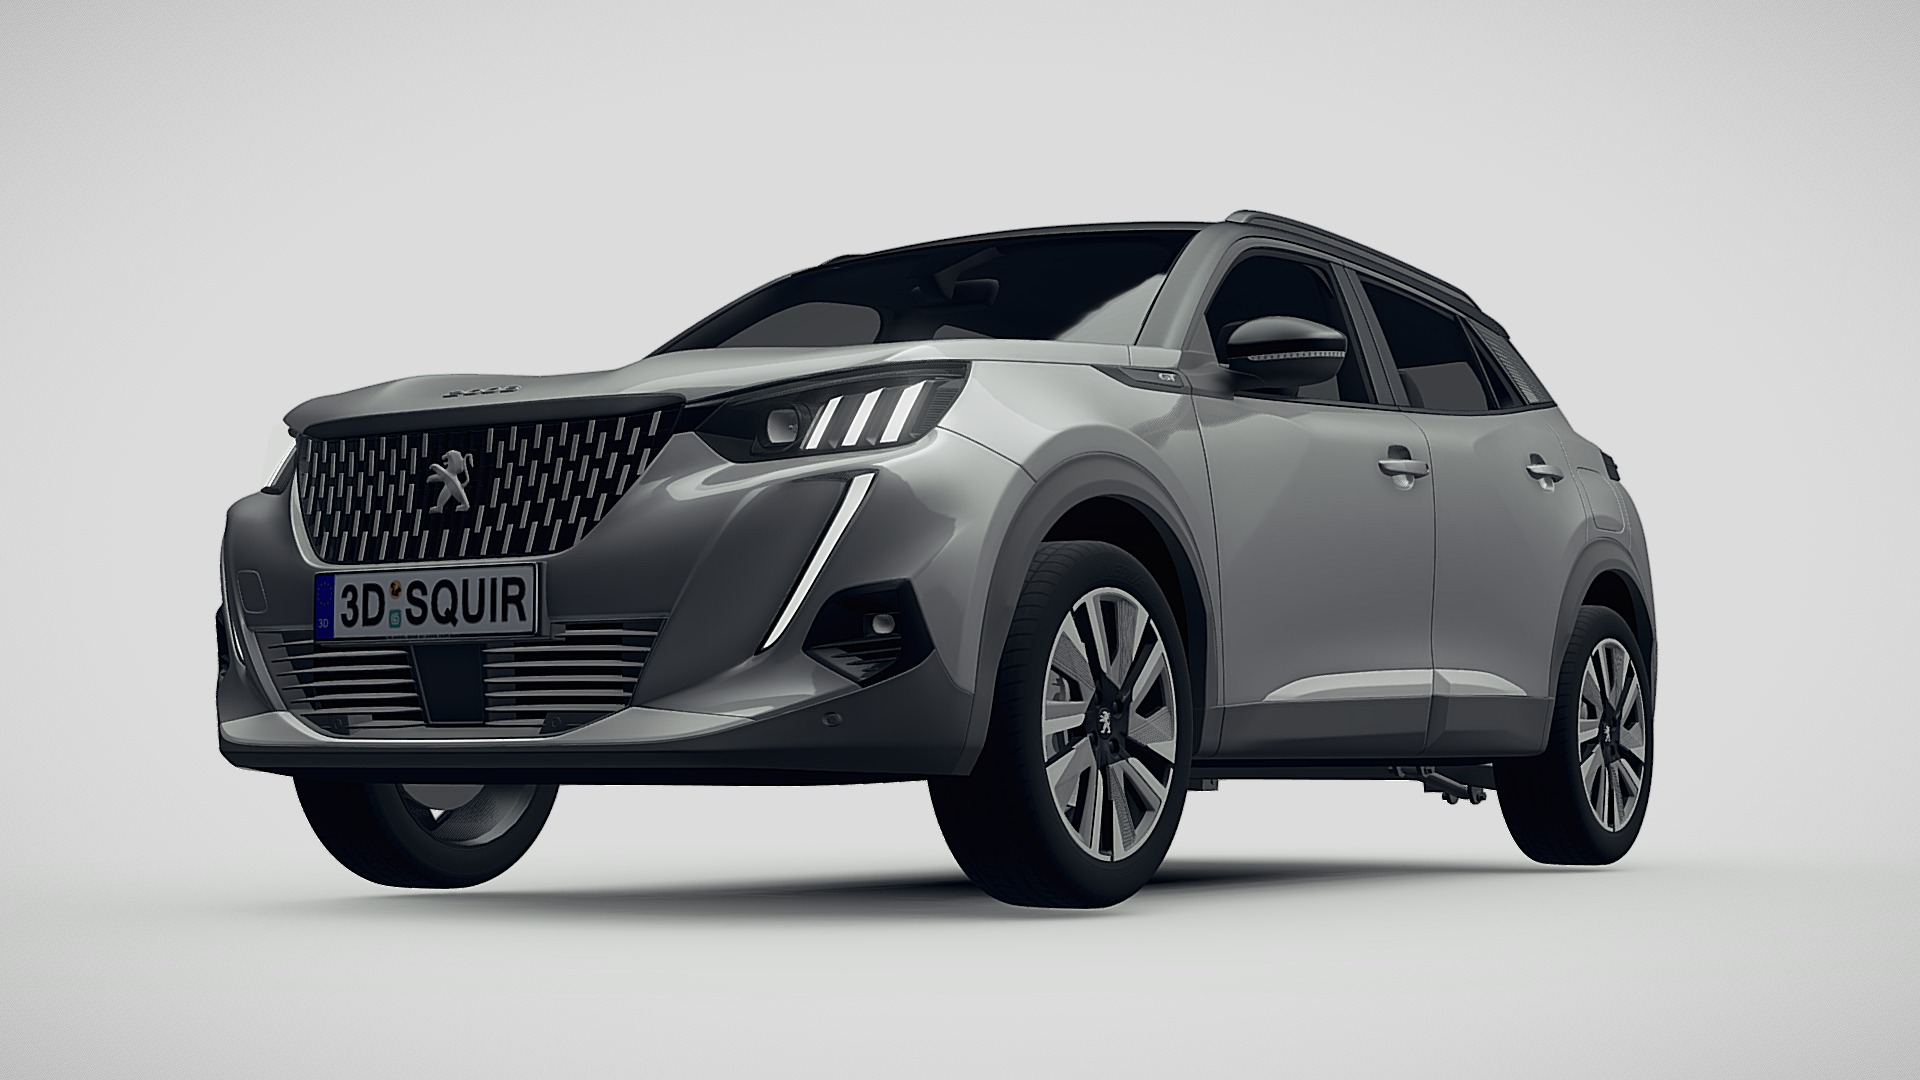 3D model Peugeot 2008 2020 - This is a 3D model of the Peugeot 2008 2020. The 3D model is about a silver car with a black background.